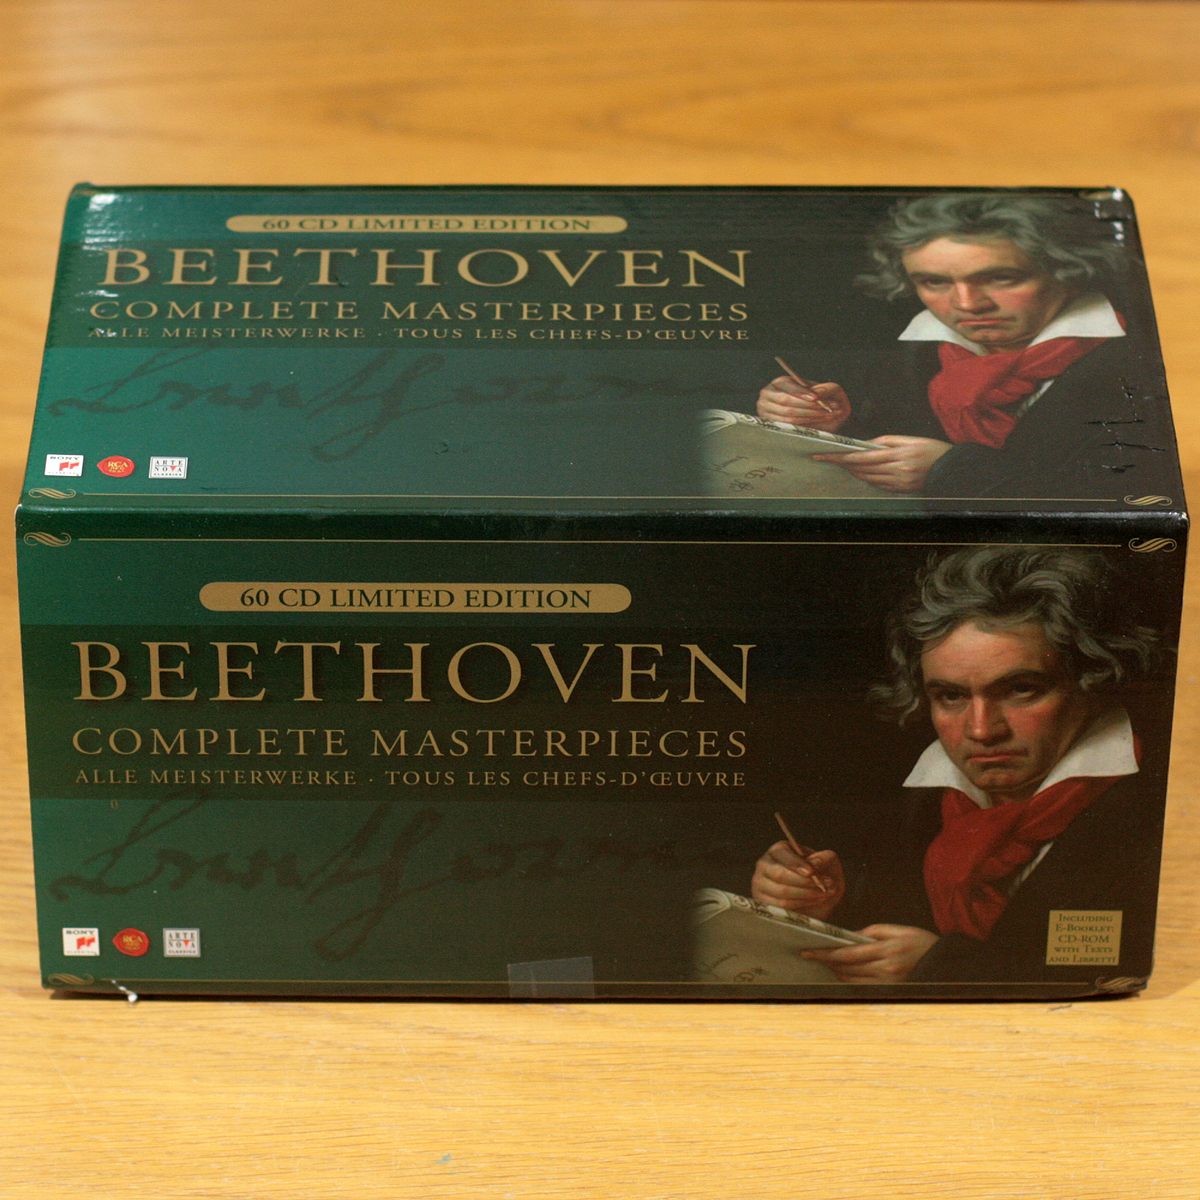 Beethoven • Complete Masterpieces • Alle Meisterwerke • L'ensemble des chefs-d'œuvre • 60 CD • Sony Classical